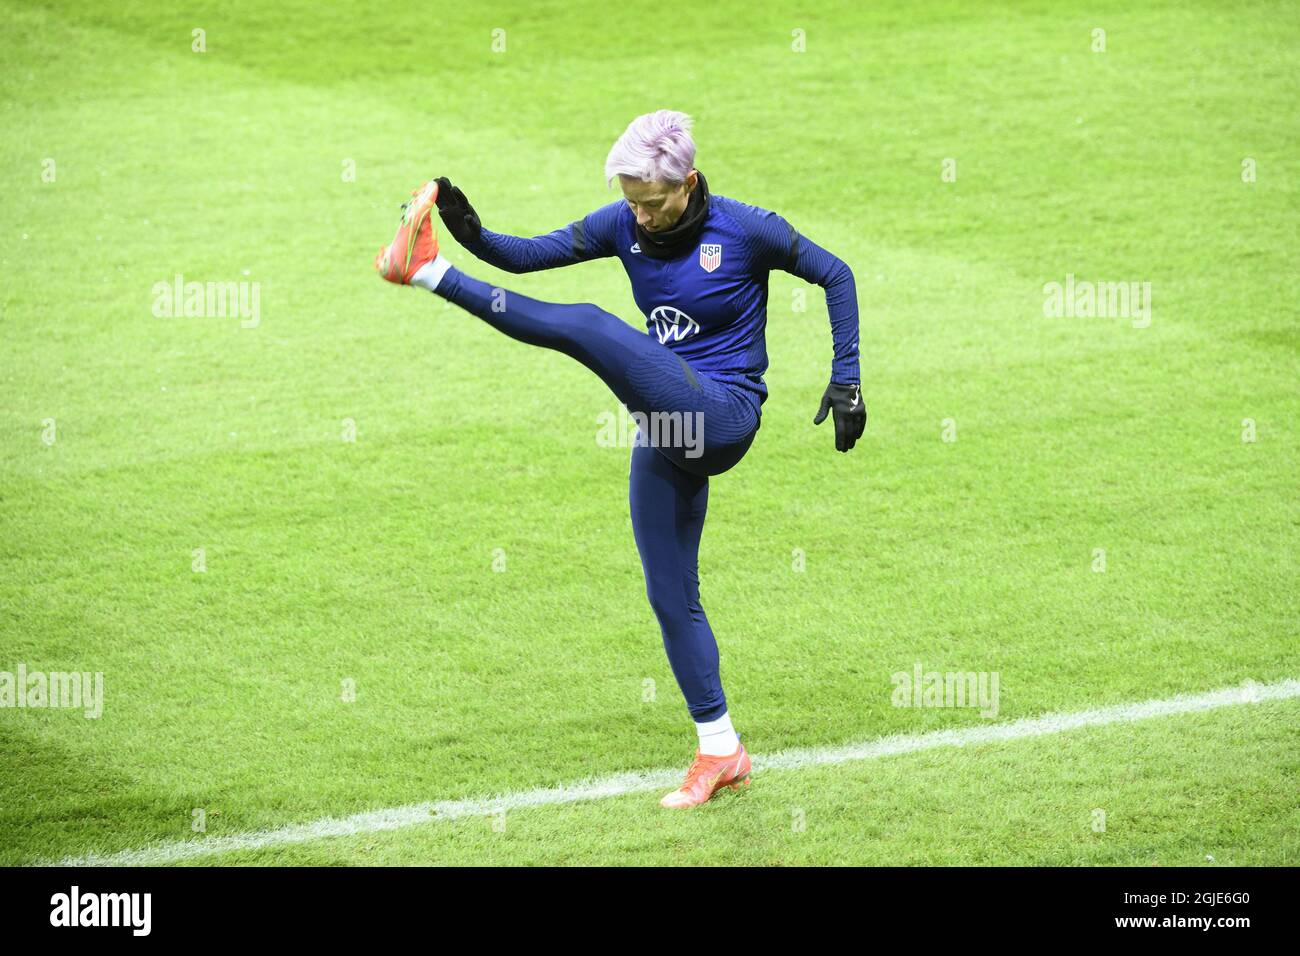 Megan Rapinoe in action during a USA women's national team training session at Friends arena in Stockholm, Sweden, on Friday April 9, 2021. USA will meet Sweden in a friendly international game on Saturday. Photo: Henrik Montgomery / TT / kod 10060 *** SWEDEN OUT ***  Stock Photo